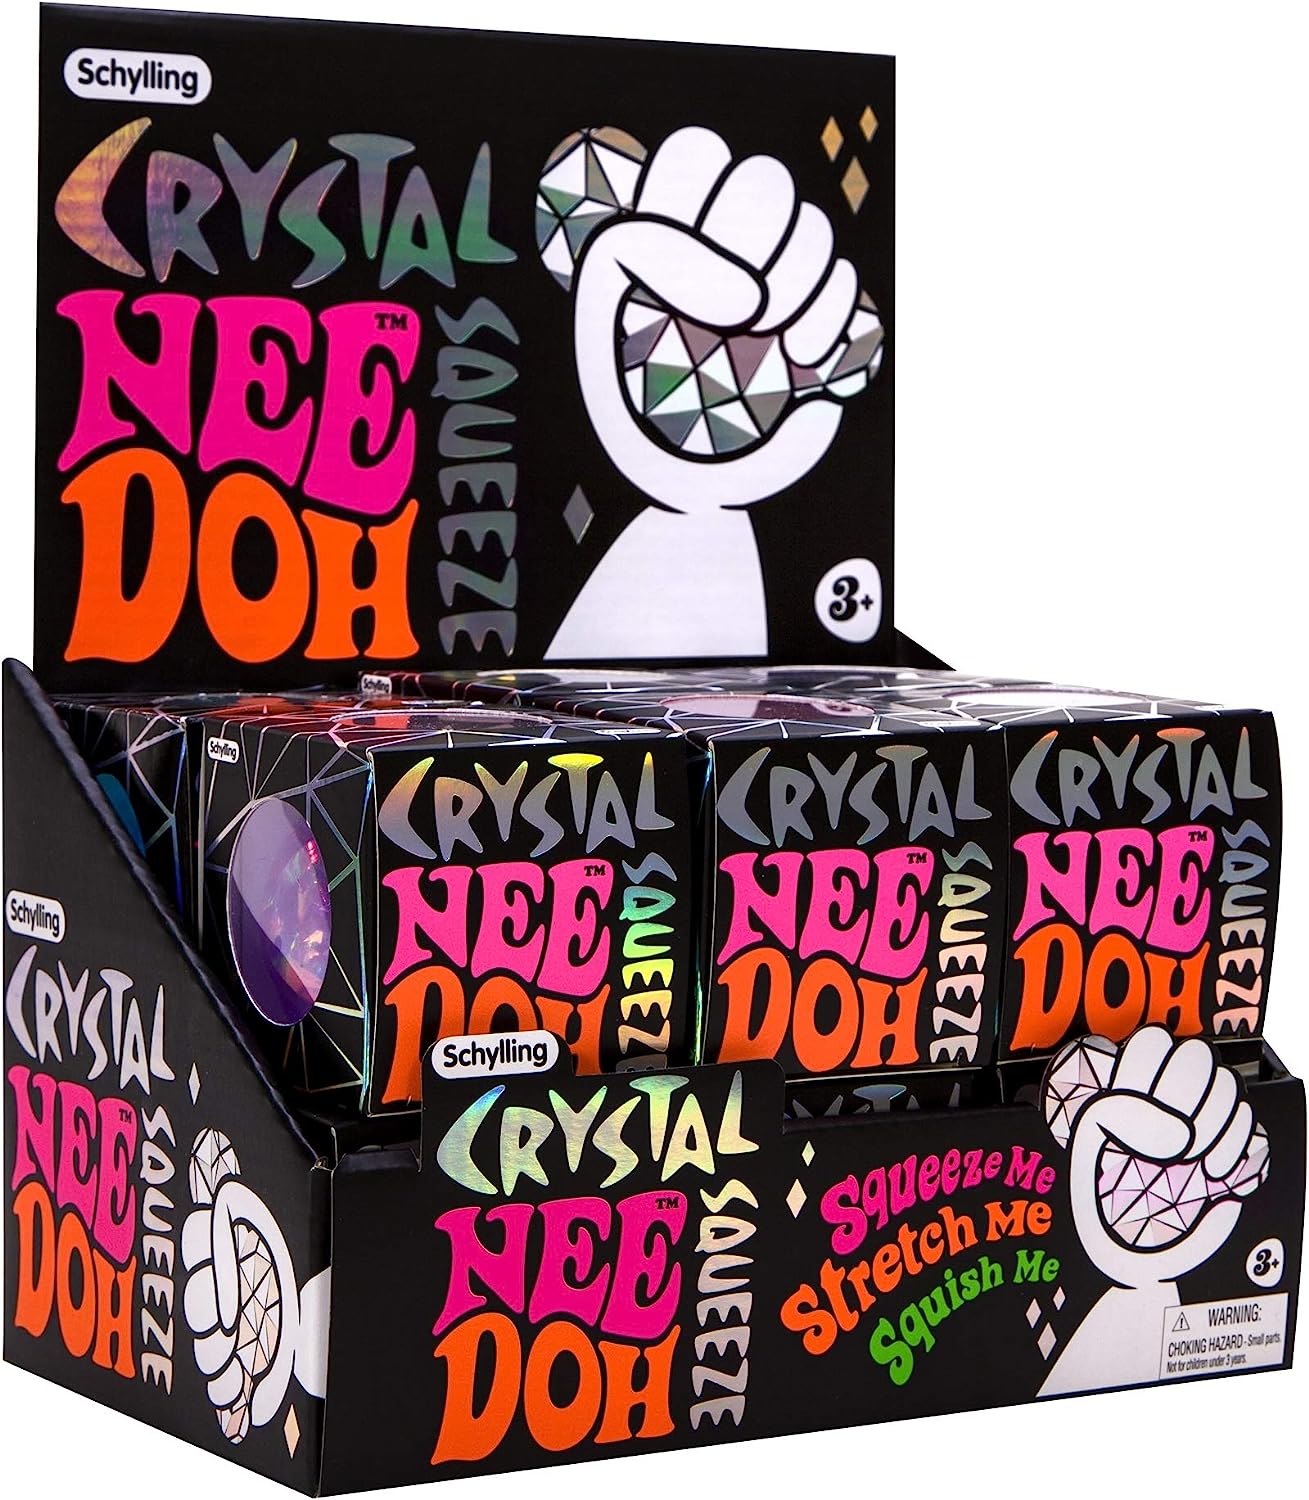 The display box for Crystal Nee Doh.